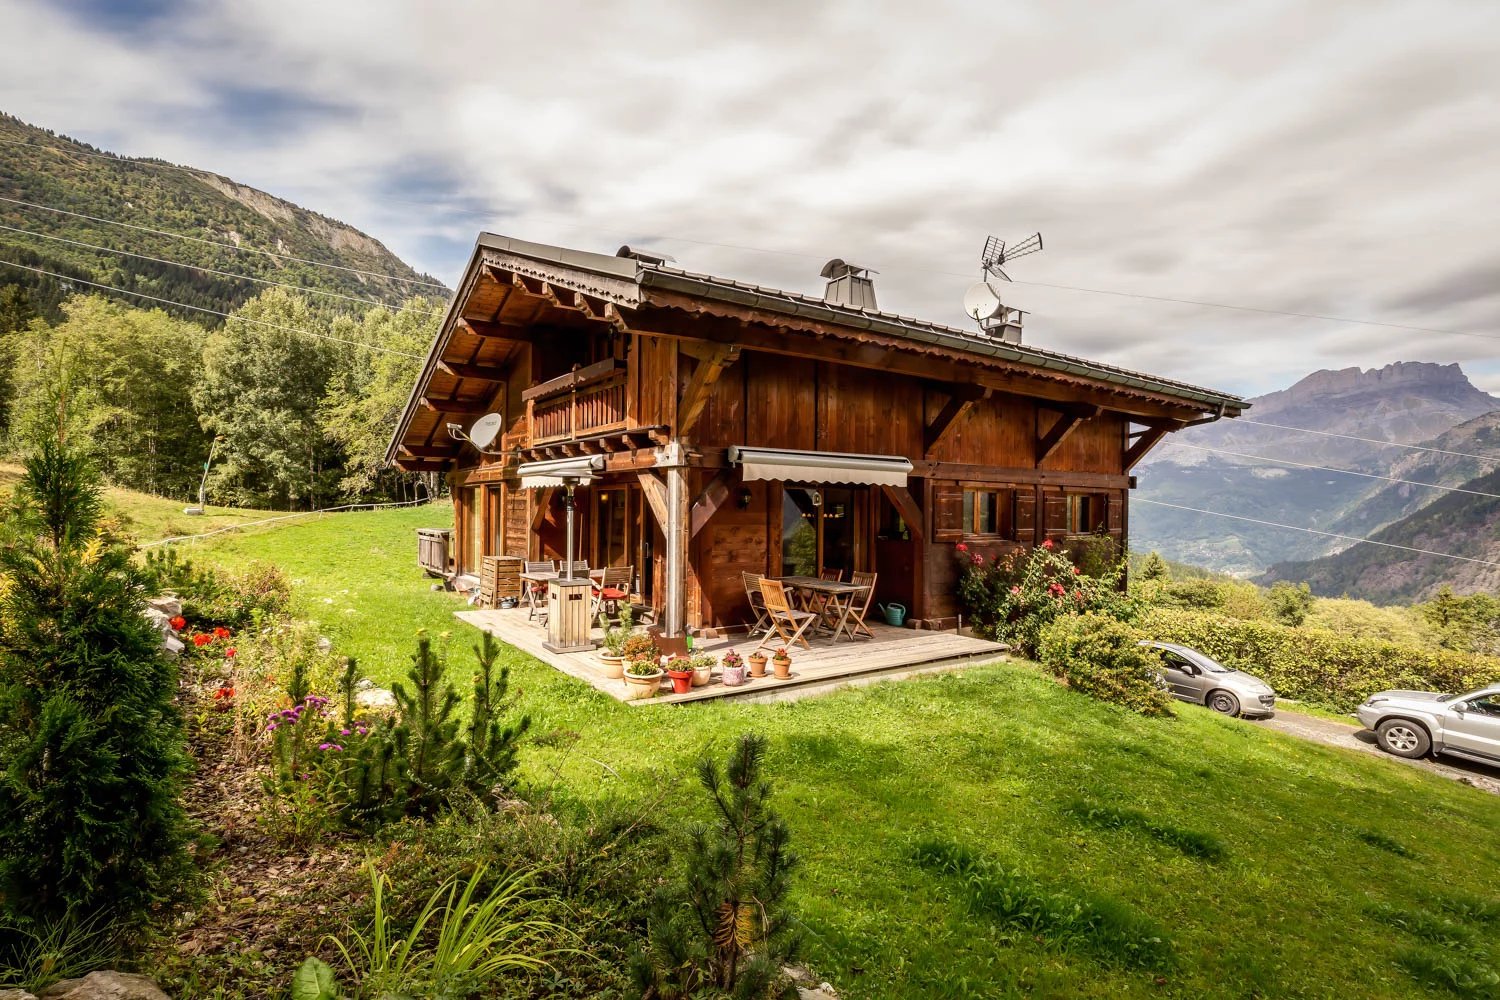 Les Houches - Pretty 4 bedroom chalet located on the slopes